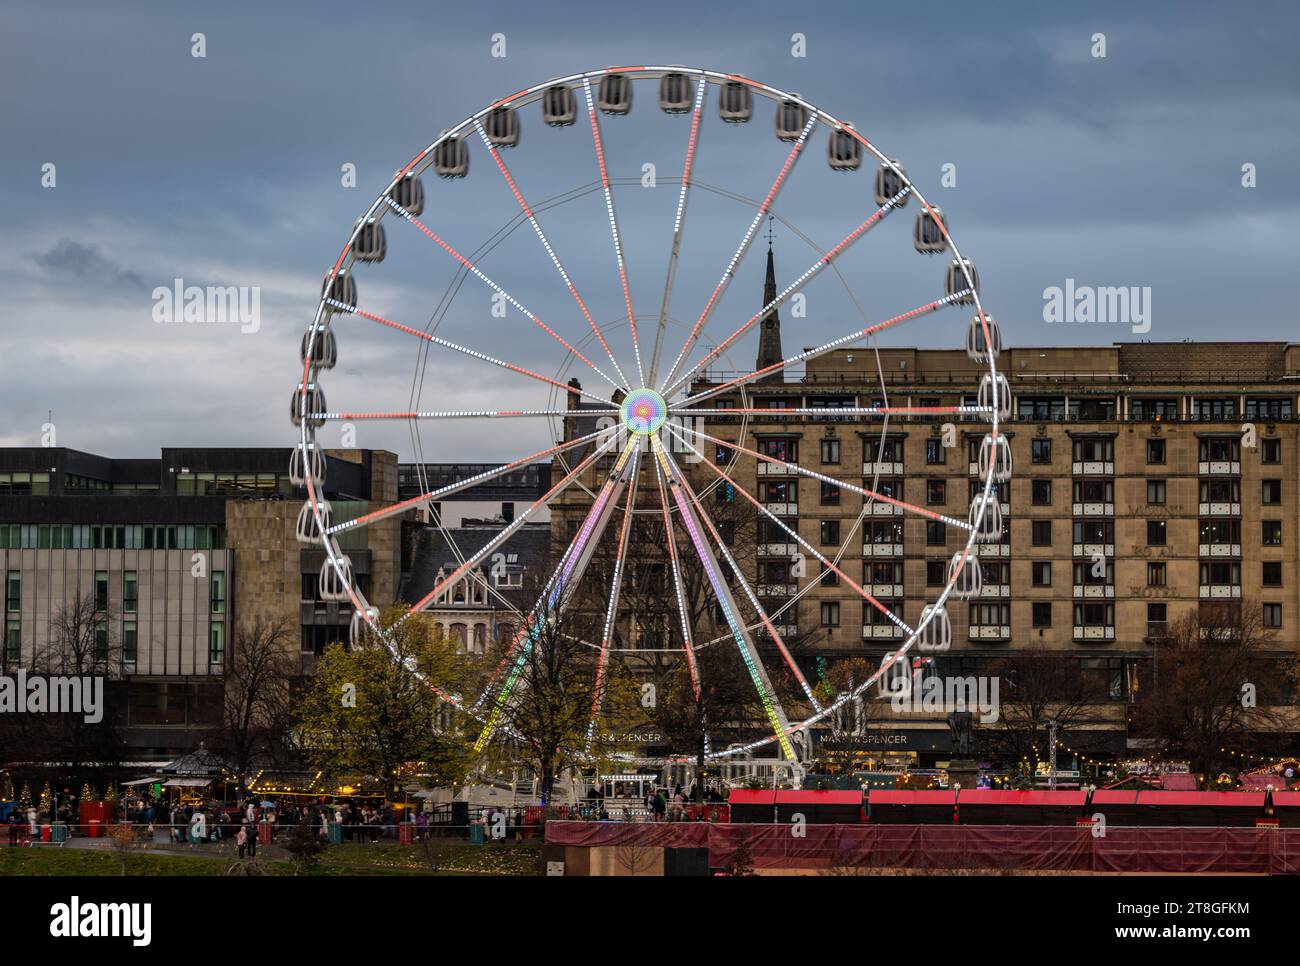 Edinburgh, Scotland, UK, 20th November 2023. The lights of Christmas decorations, Christmas market and the big ferris wheel funfair ride in Princes Street Garden are an attraction in the dusk light. Credit: Sally  Anderson/Alamy Live News Stock Photo